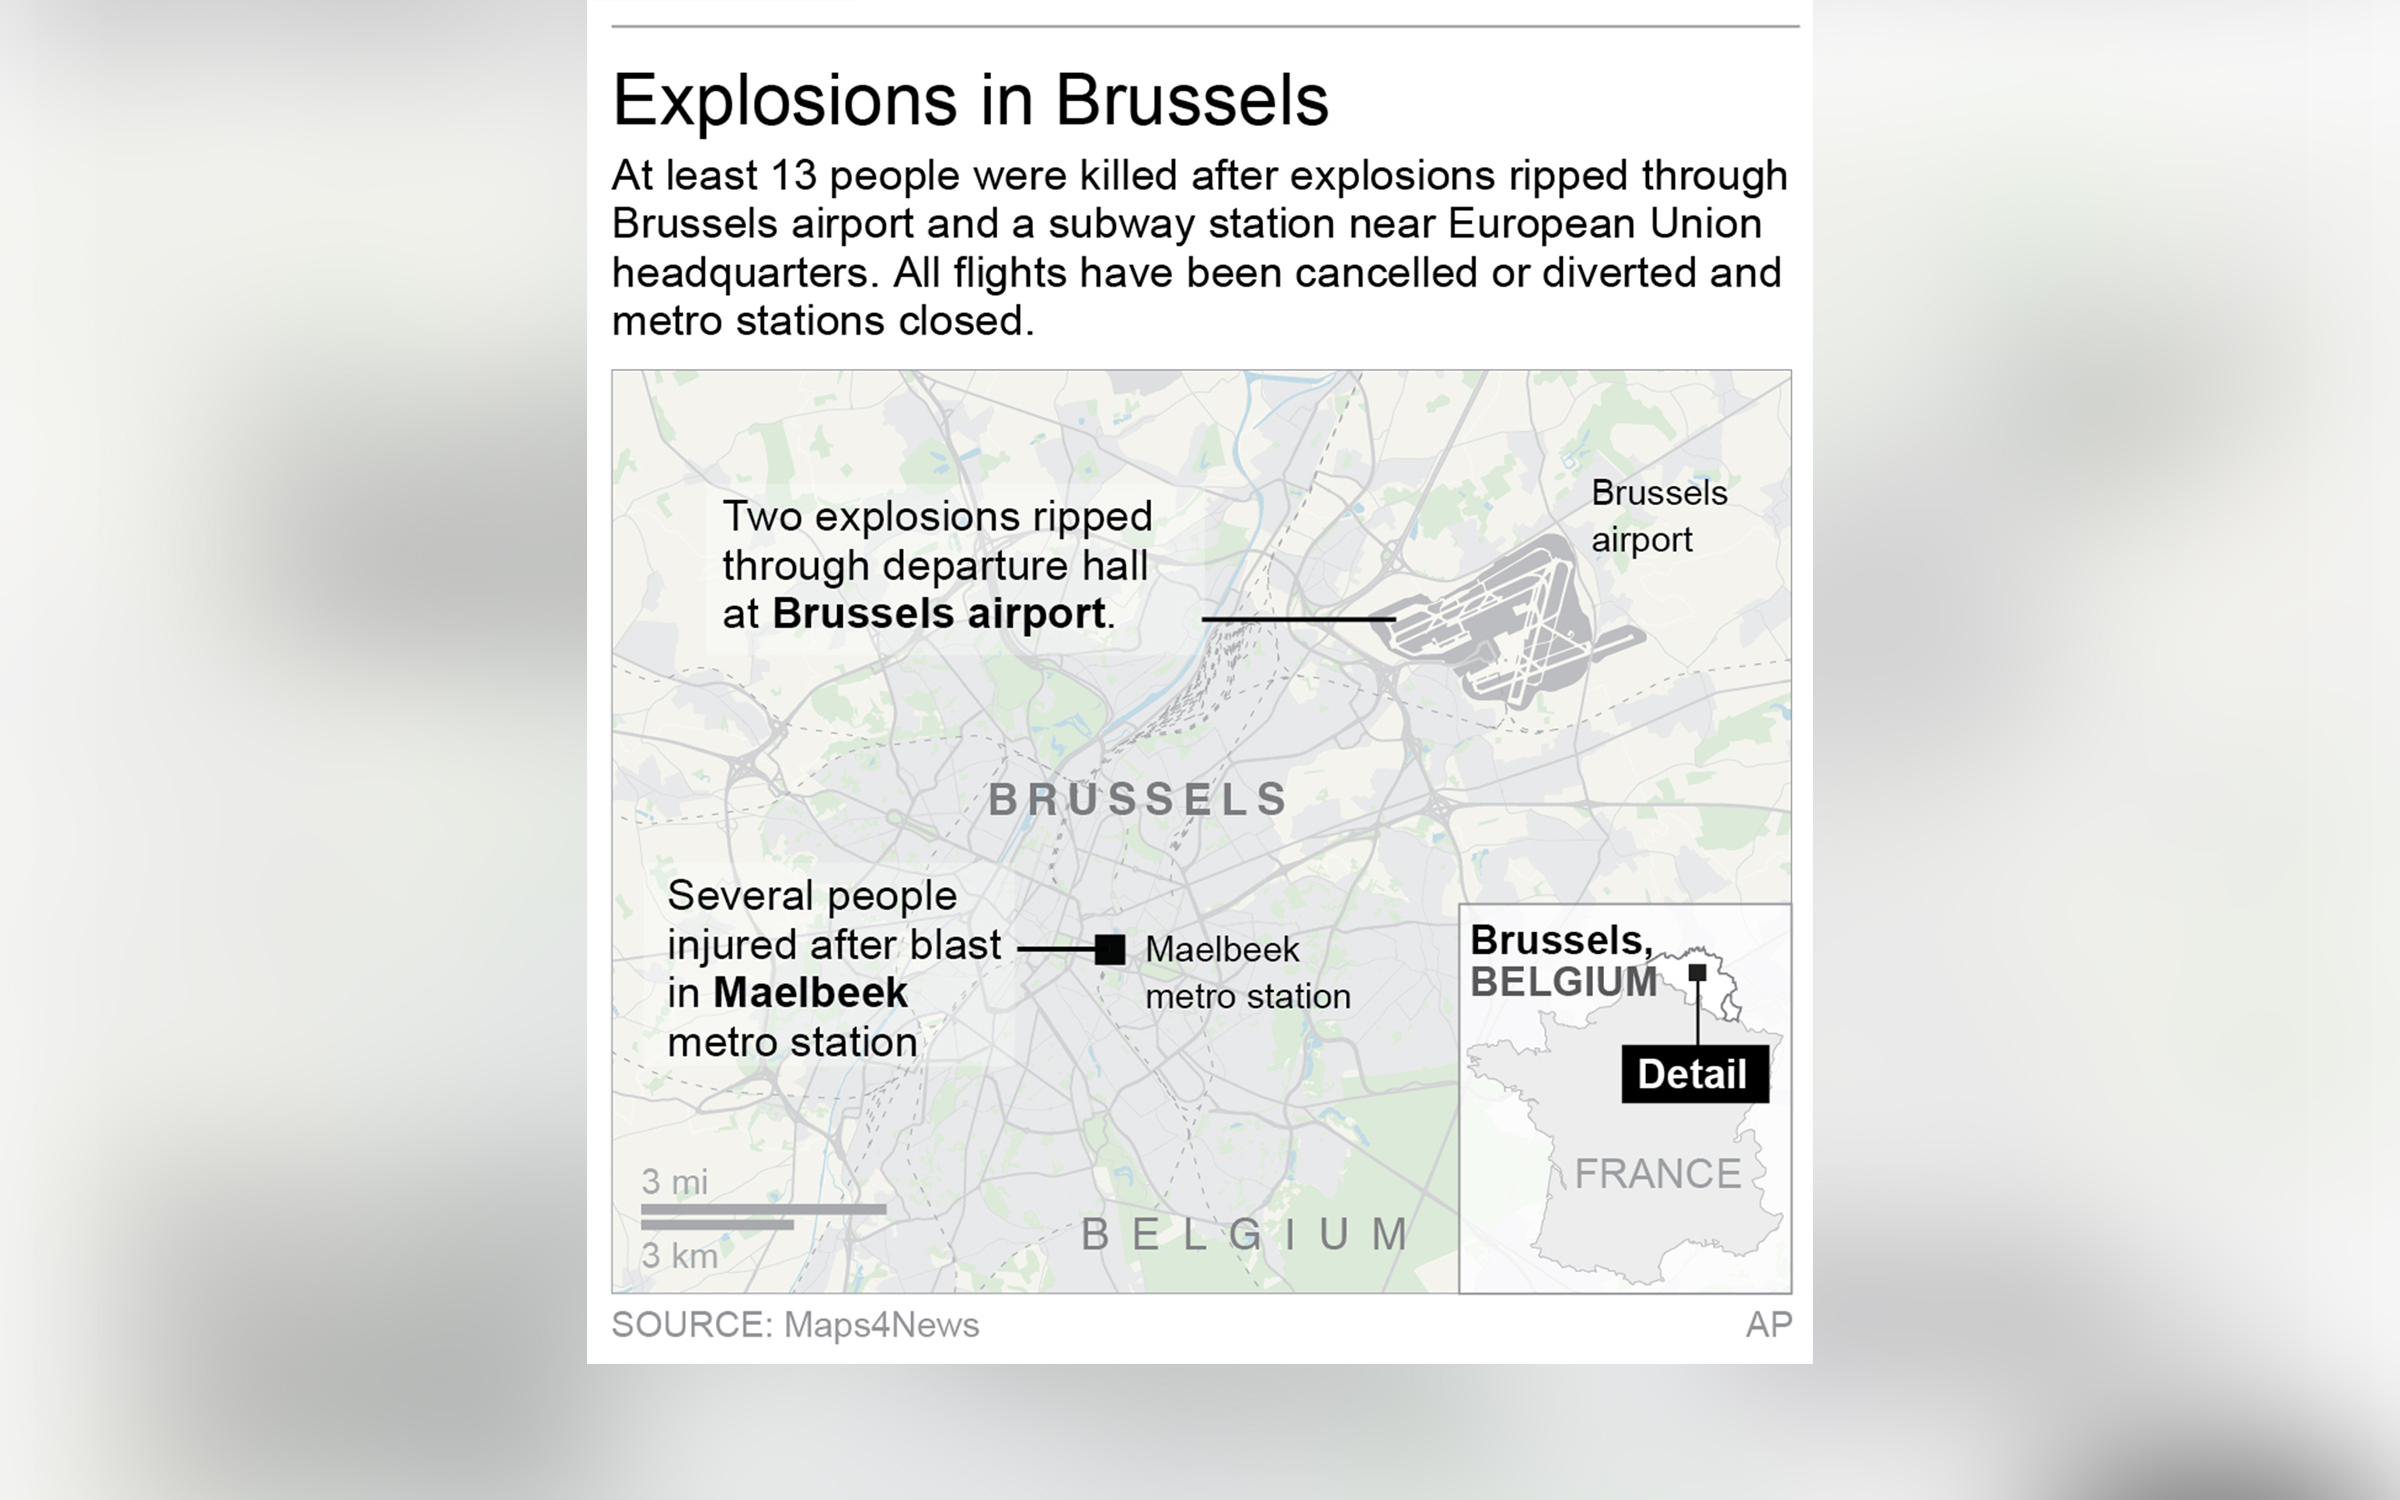 PHOTO: A map from the Associated Press shows the locations of the Brussels airport and Maelbeek metro station in Belgium.